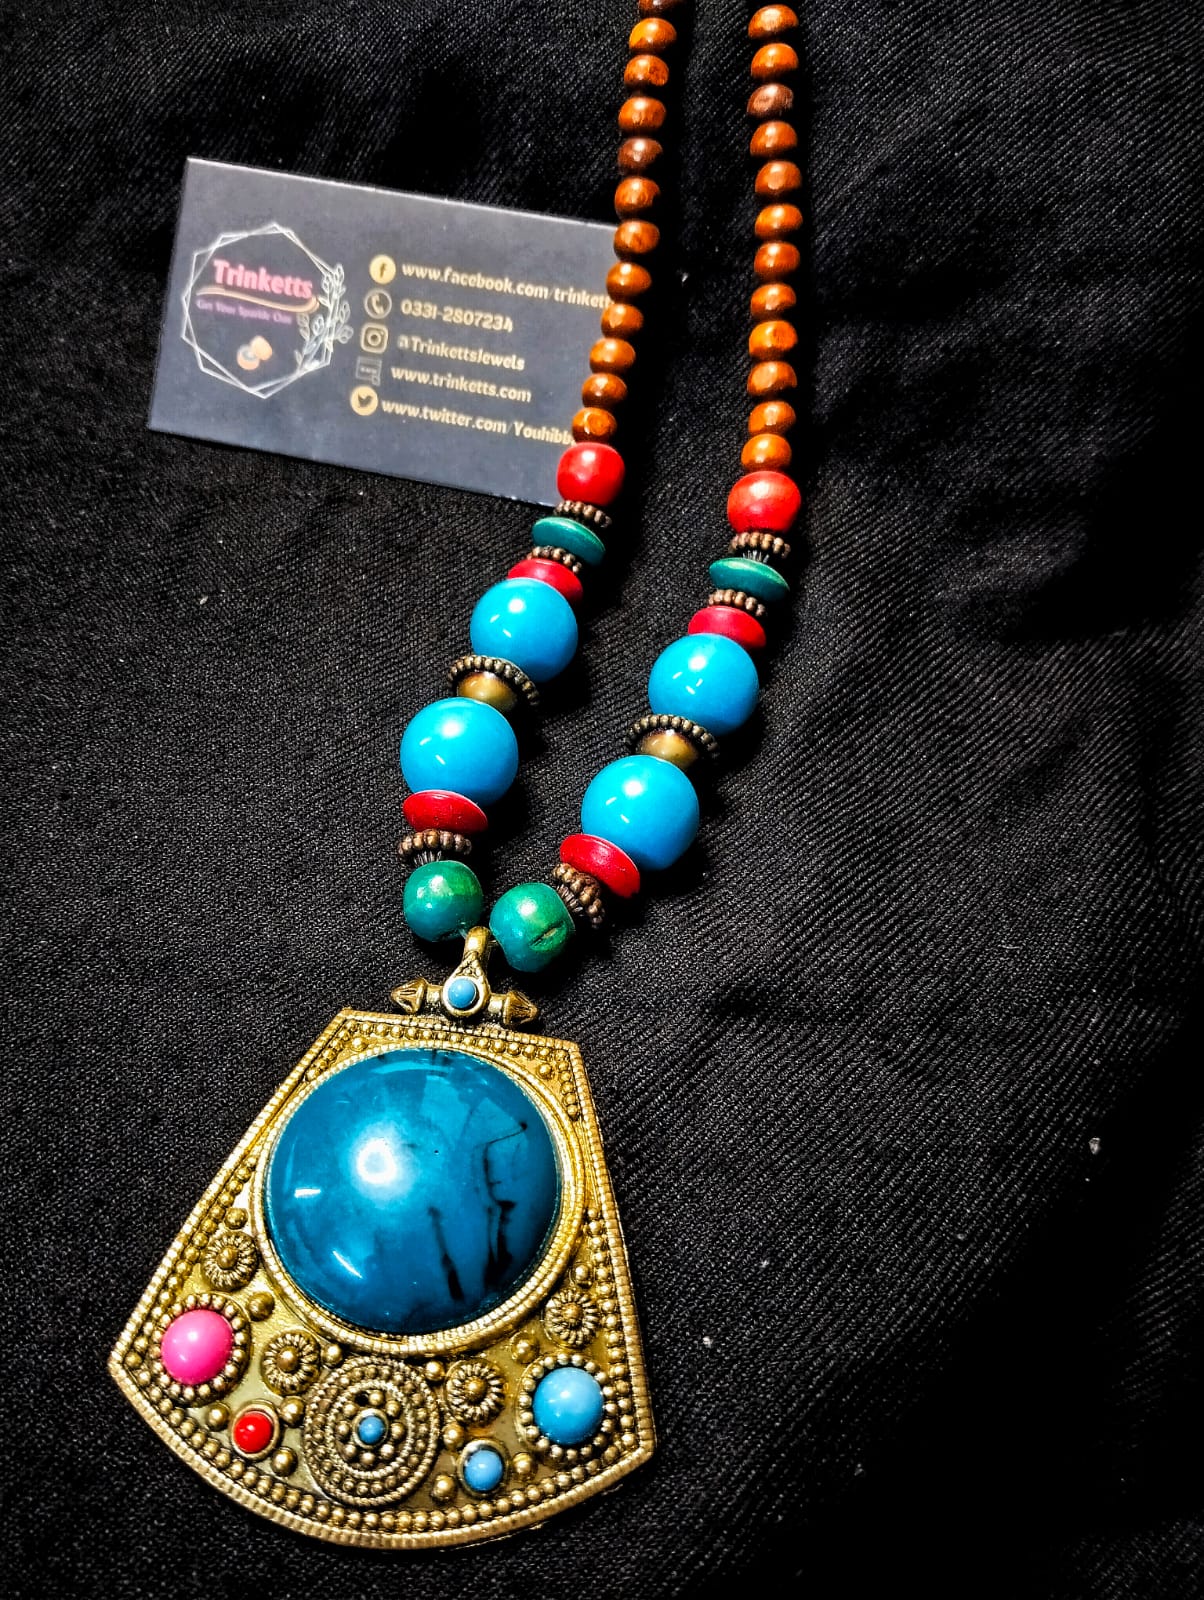 Antique-Style Maala Necklace with Brown Wooden Beads, Red and Blue Plastic Beads, and Brass-Colored Pendant Adorned with Blue Stones